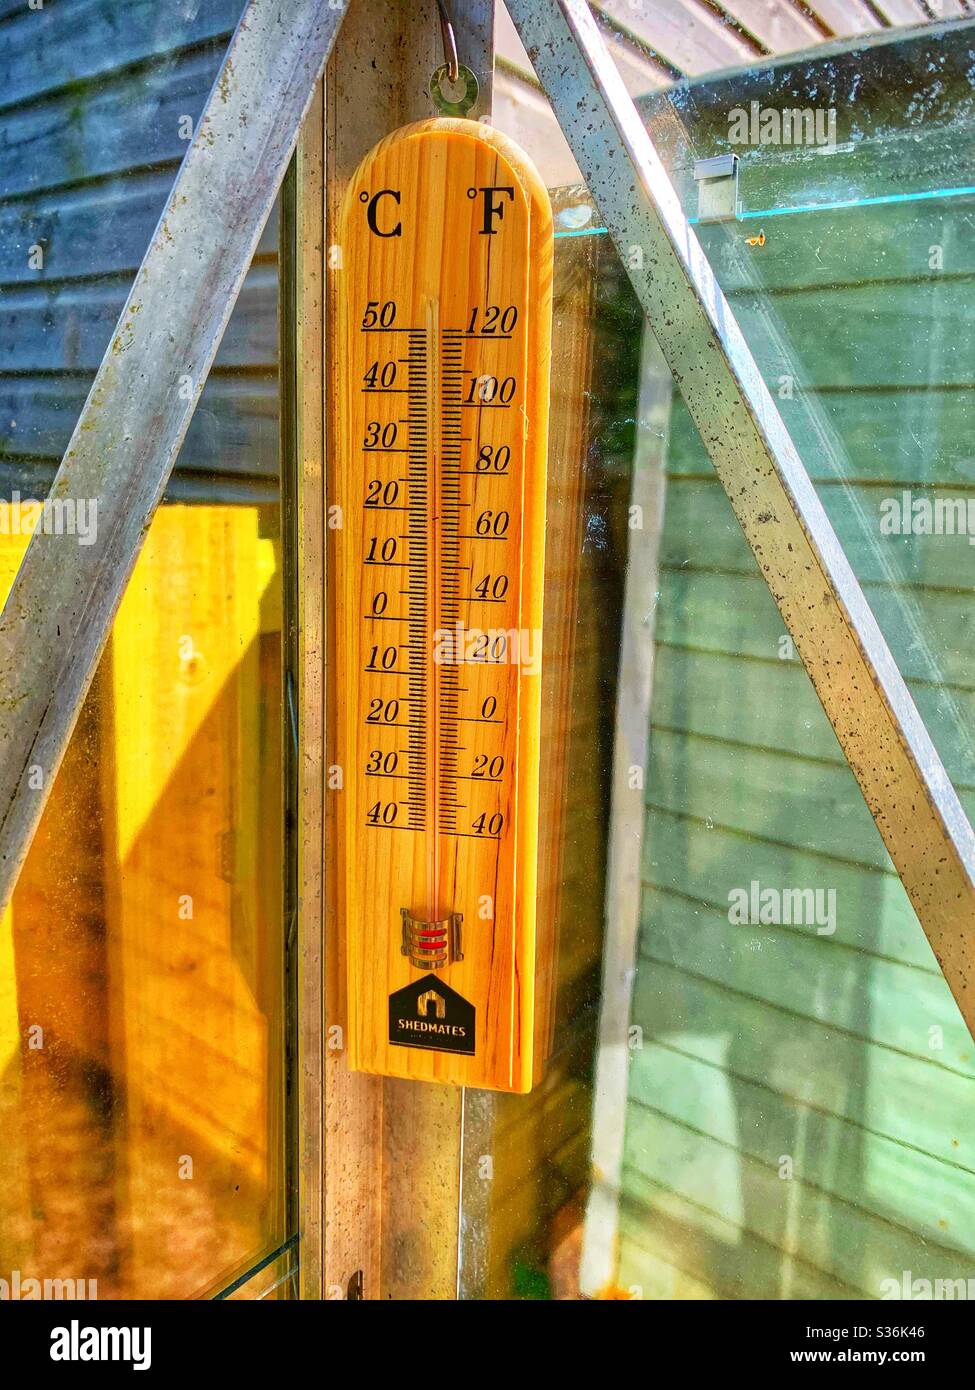 https://c8.alamy.com/comp/S36K46/thermometer-in-a-greenhouse-showing-30c-S36K46.jpg